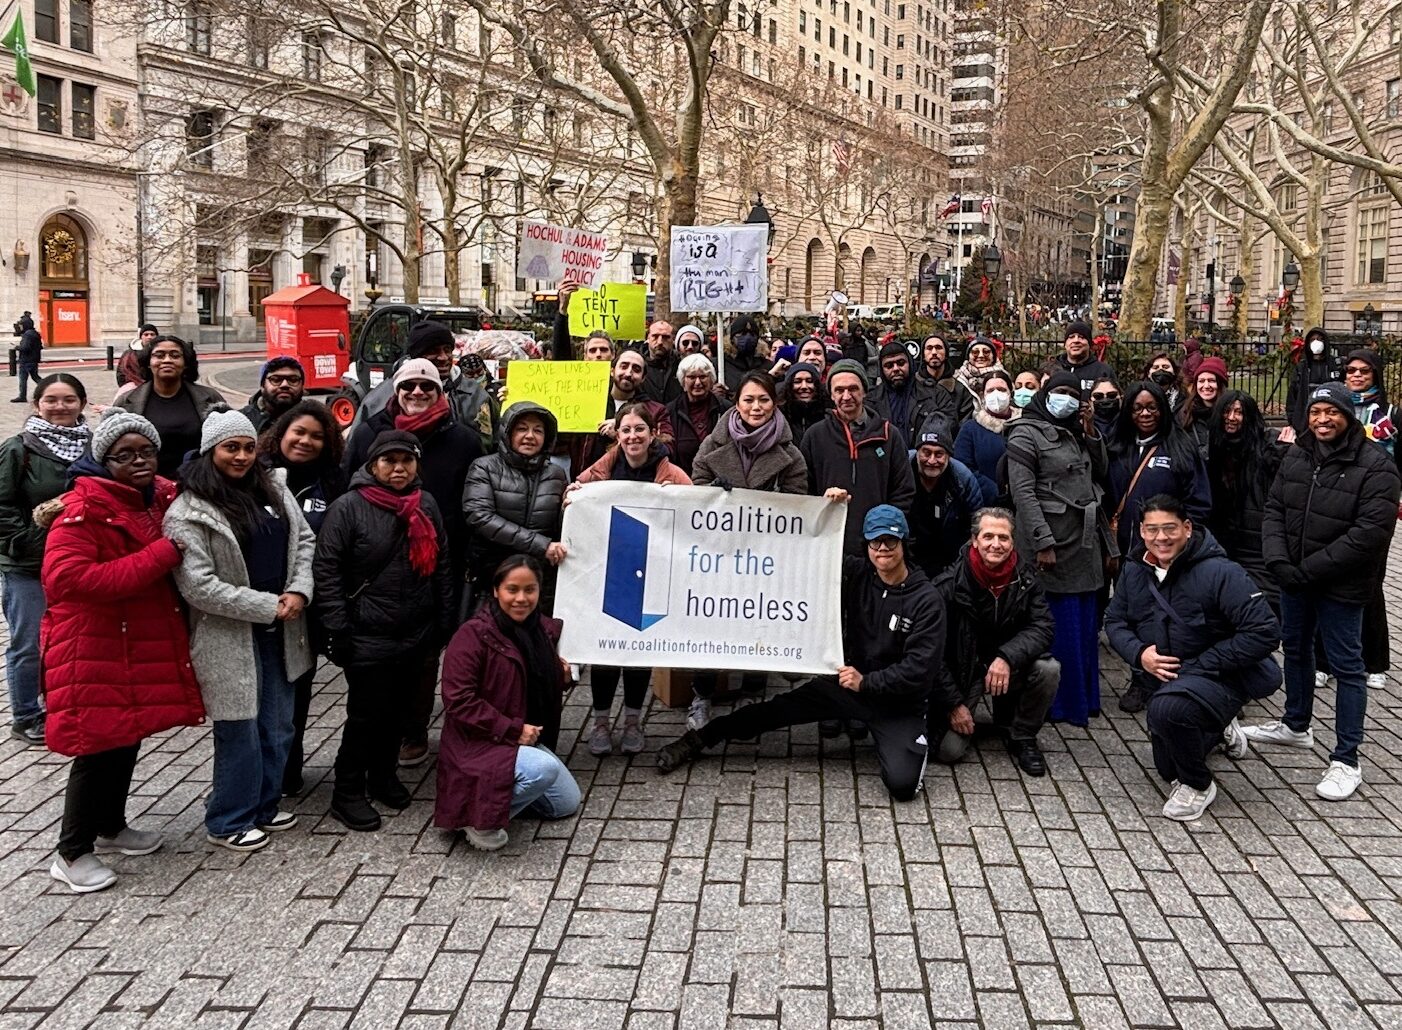 A group of people grouped together, smiling at camera and holding a sign that reads "Coalition for the Homeless" suggesting this is a staff photo.